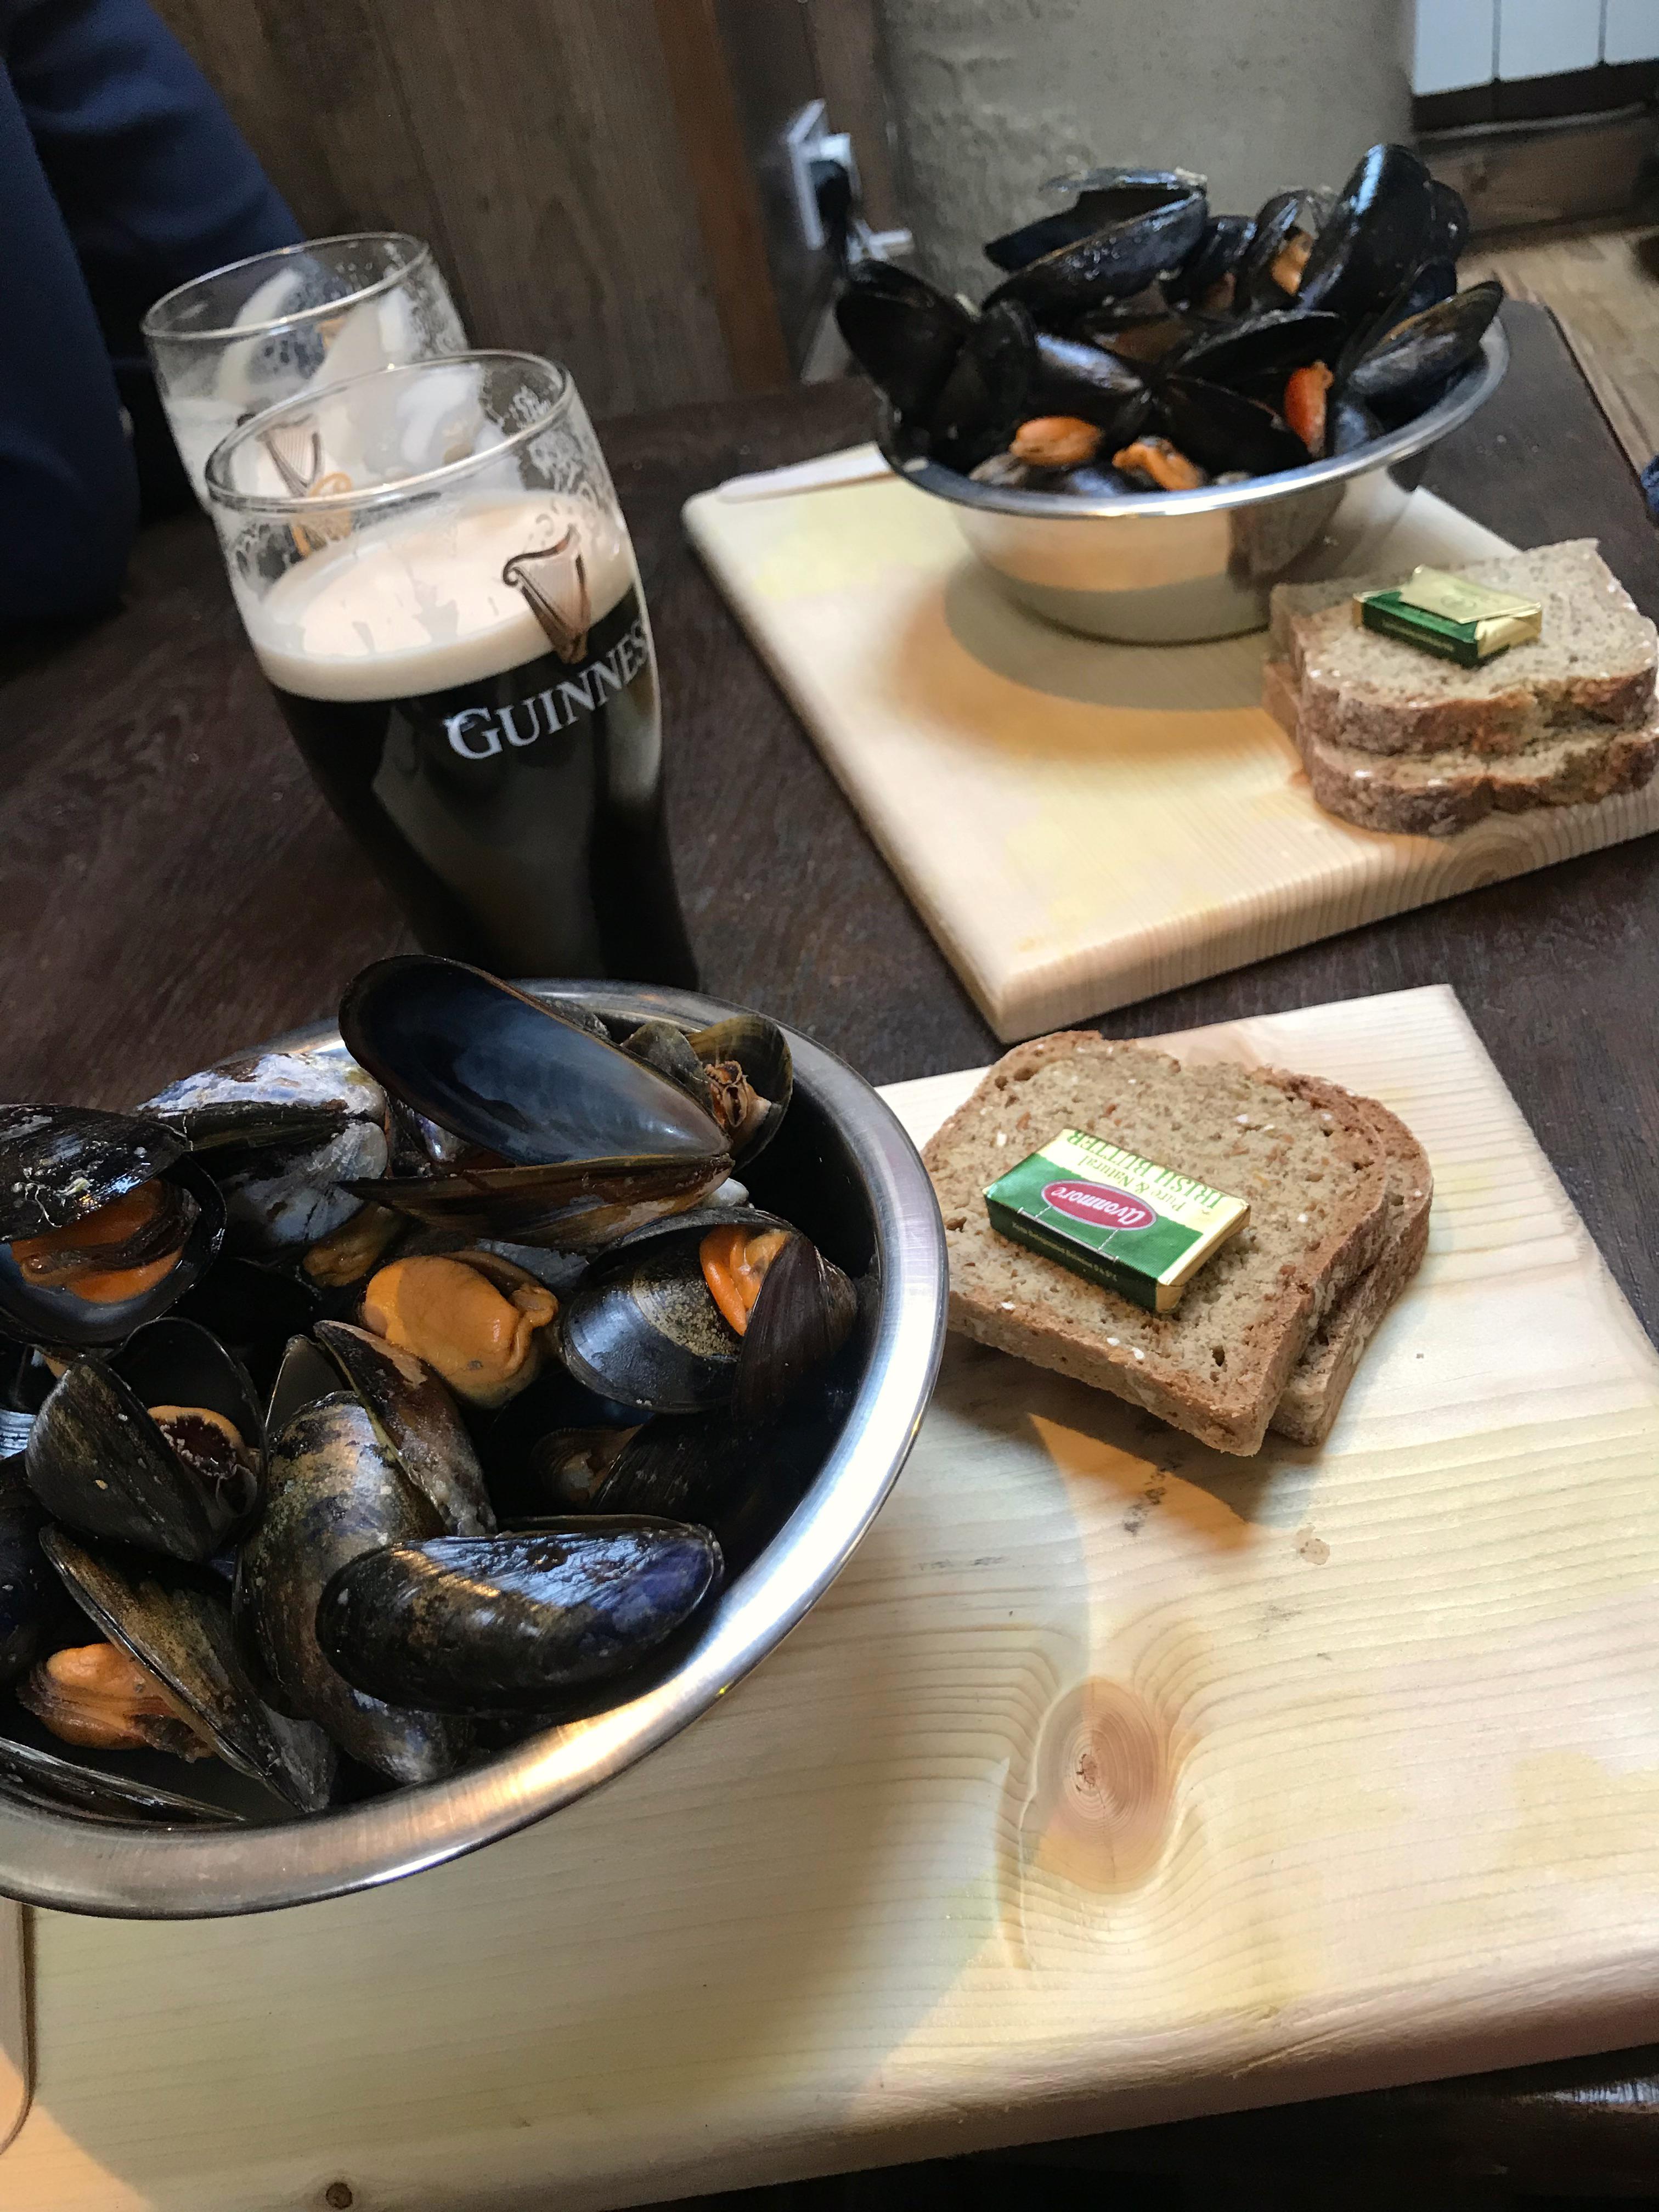 Mussels at the Connemara Mussel Festival in Ireland Dining and Cooking